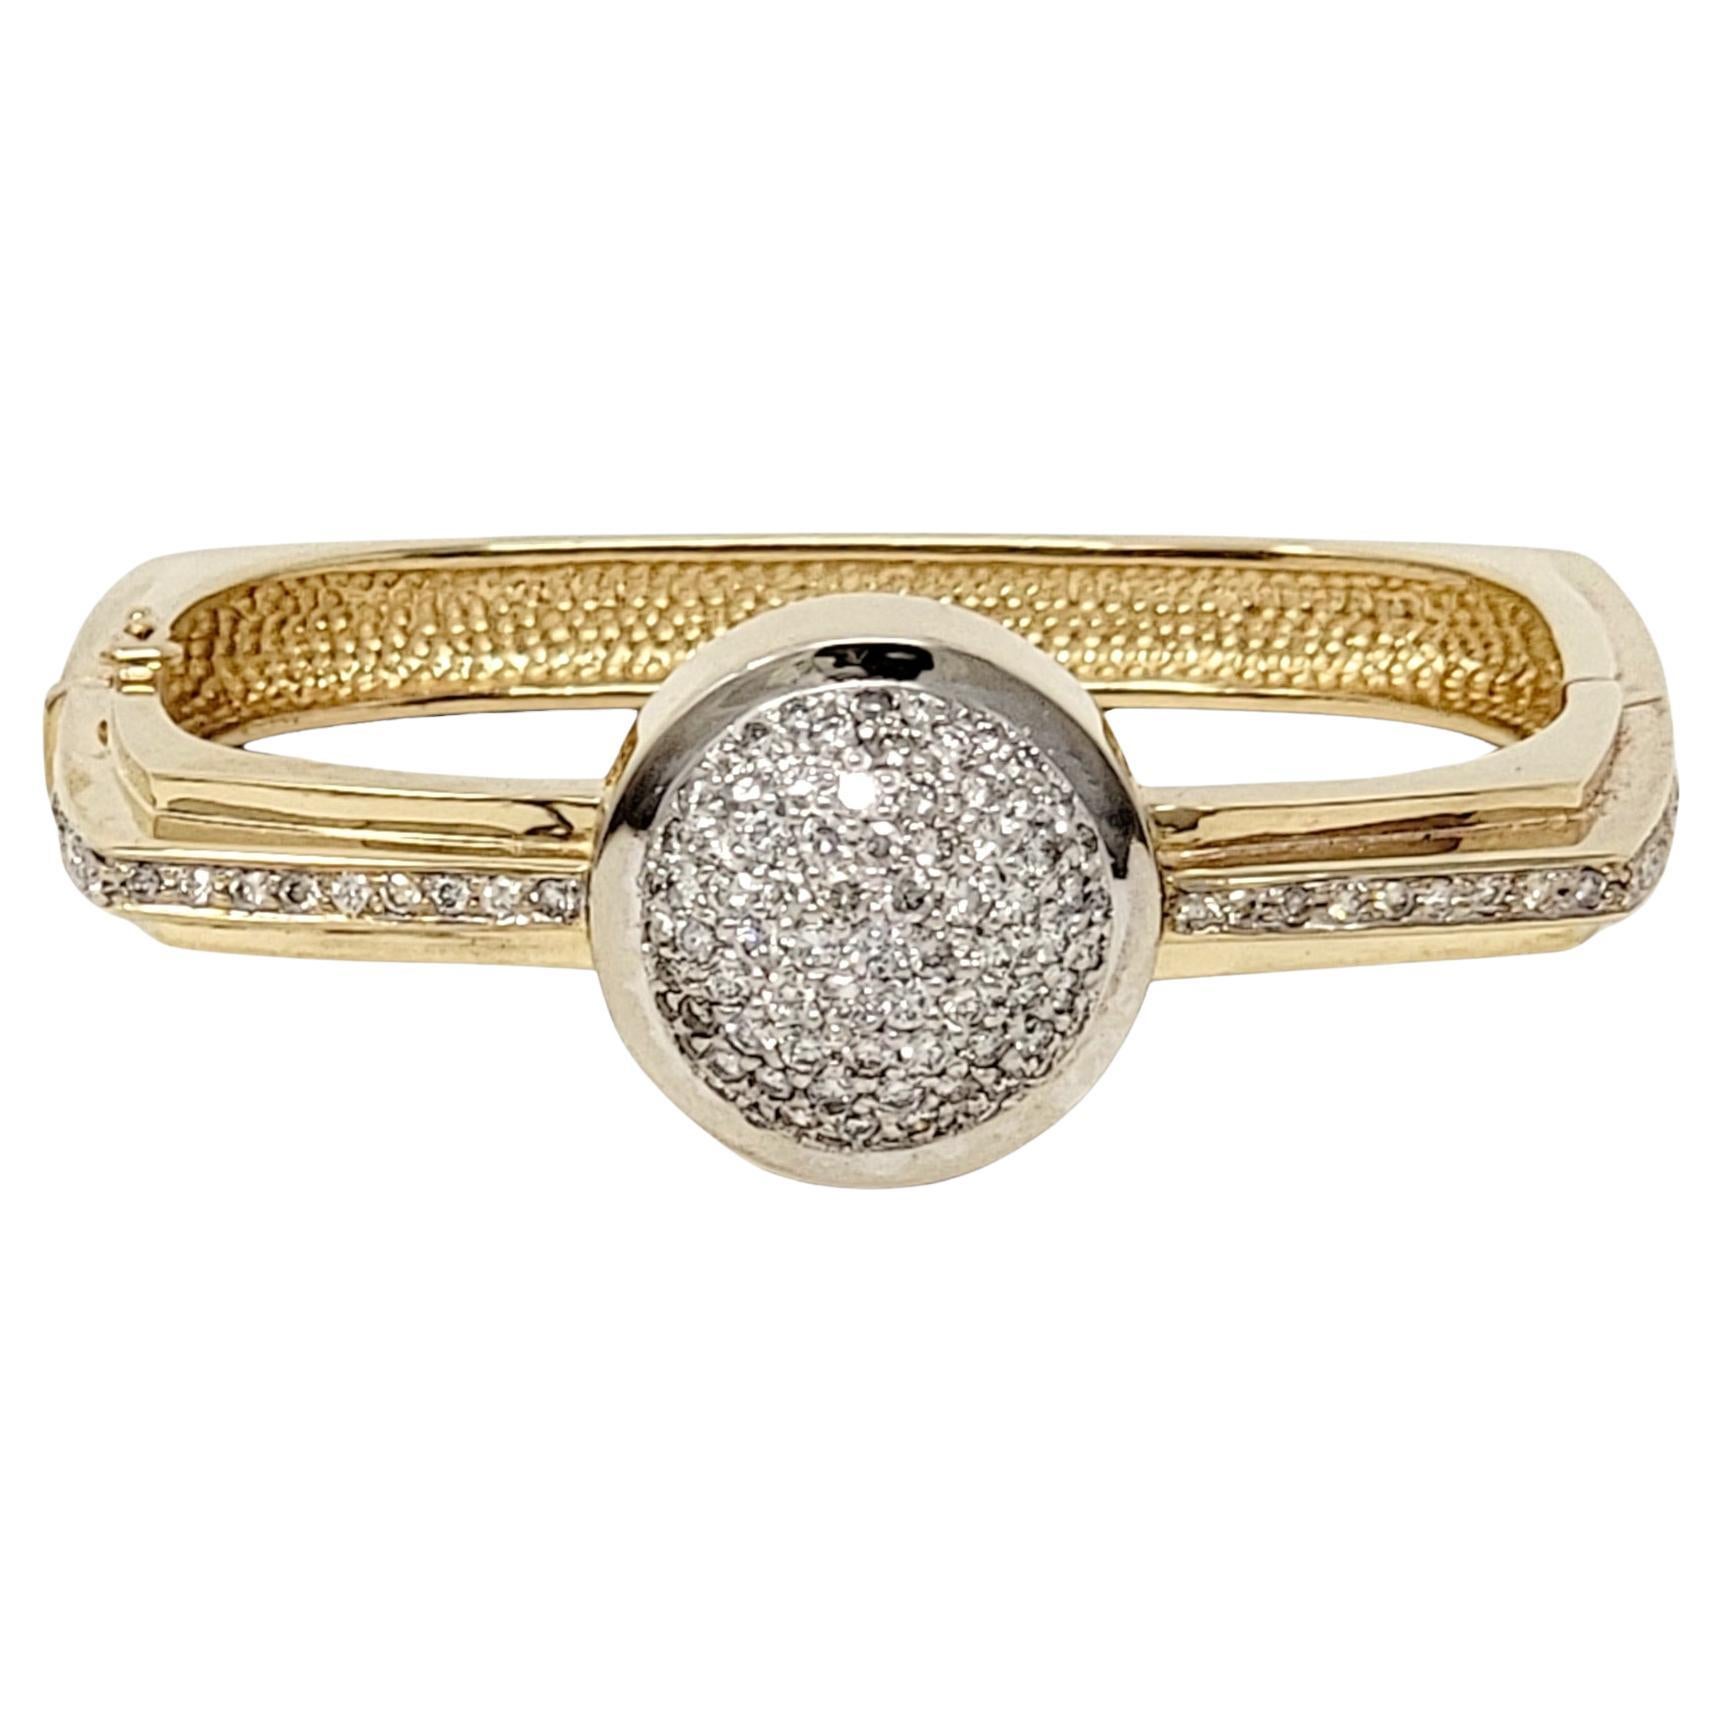 Contemporary Pave Diamond Dome Squared Hinged Bangle Bracelet in 14 Karat Gold For Sale